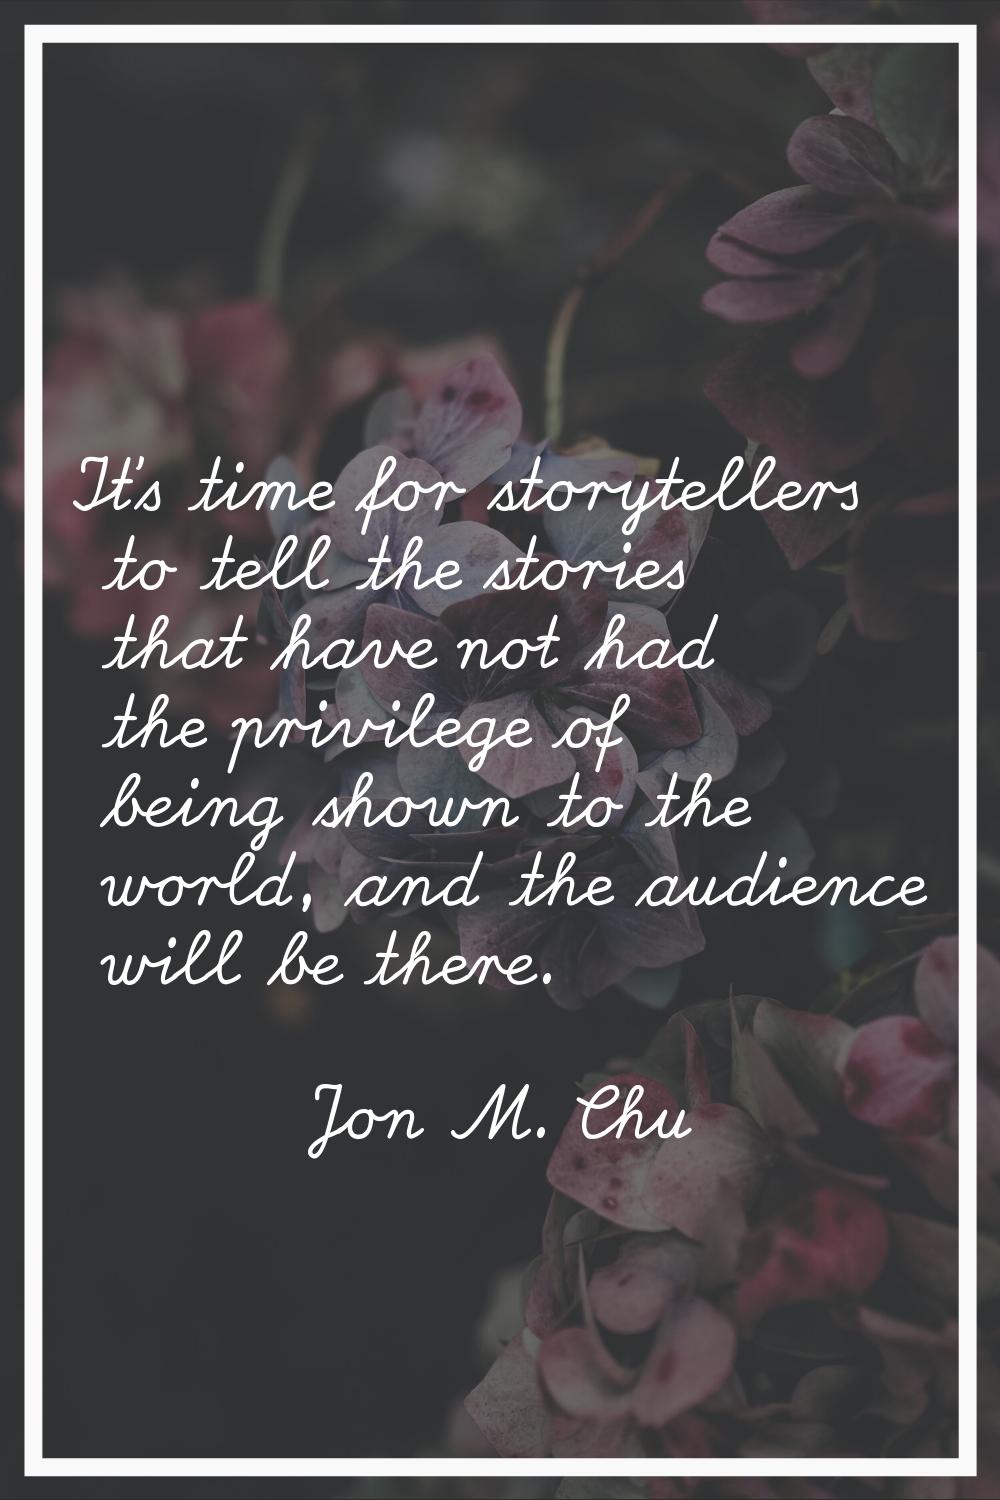 It's time for storytellers to tell the stories that have not had the privilege of being shown to th